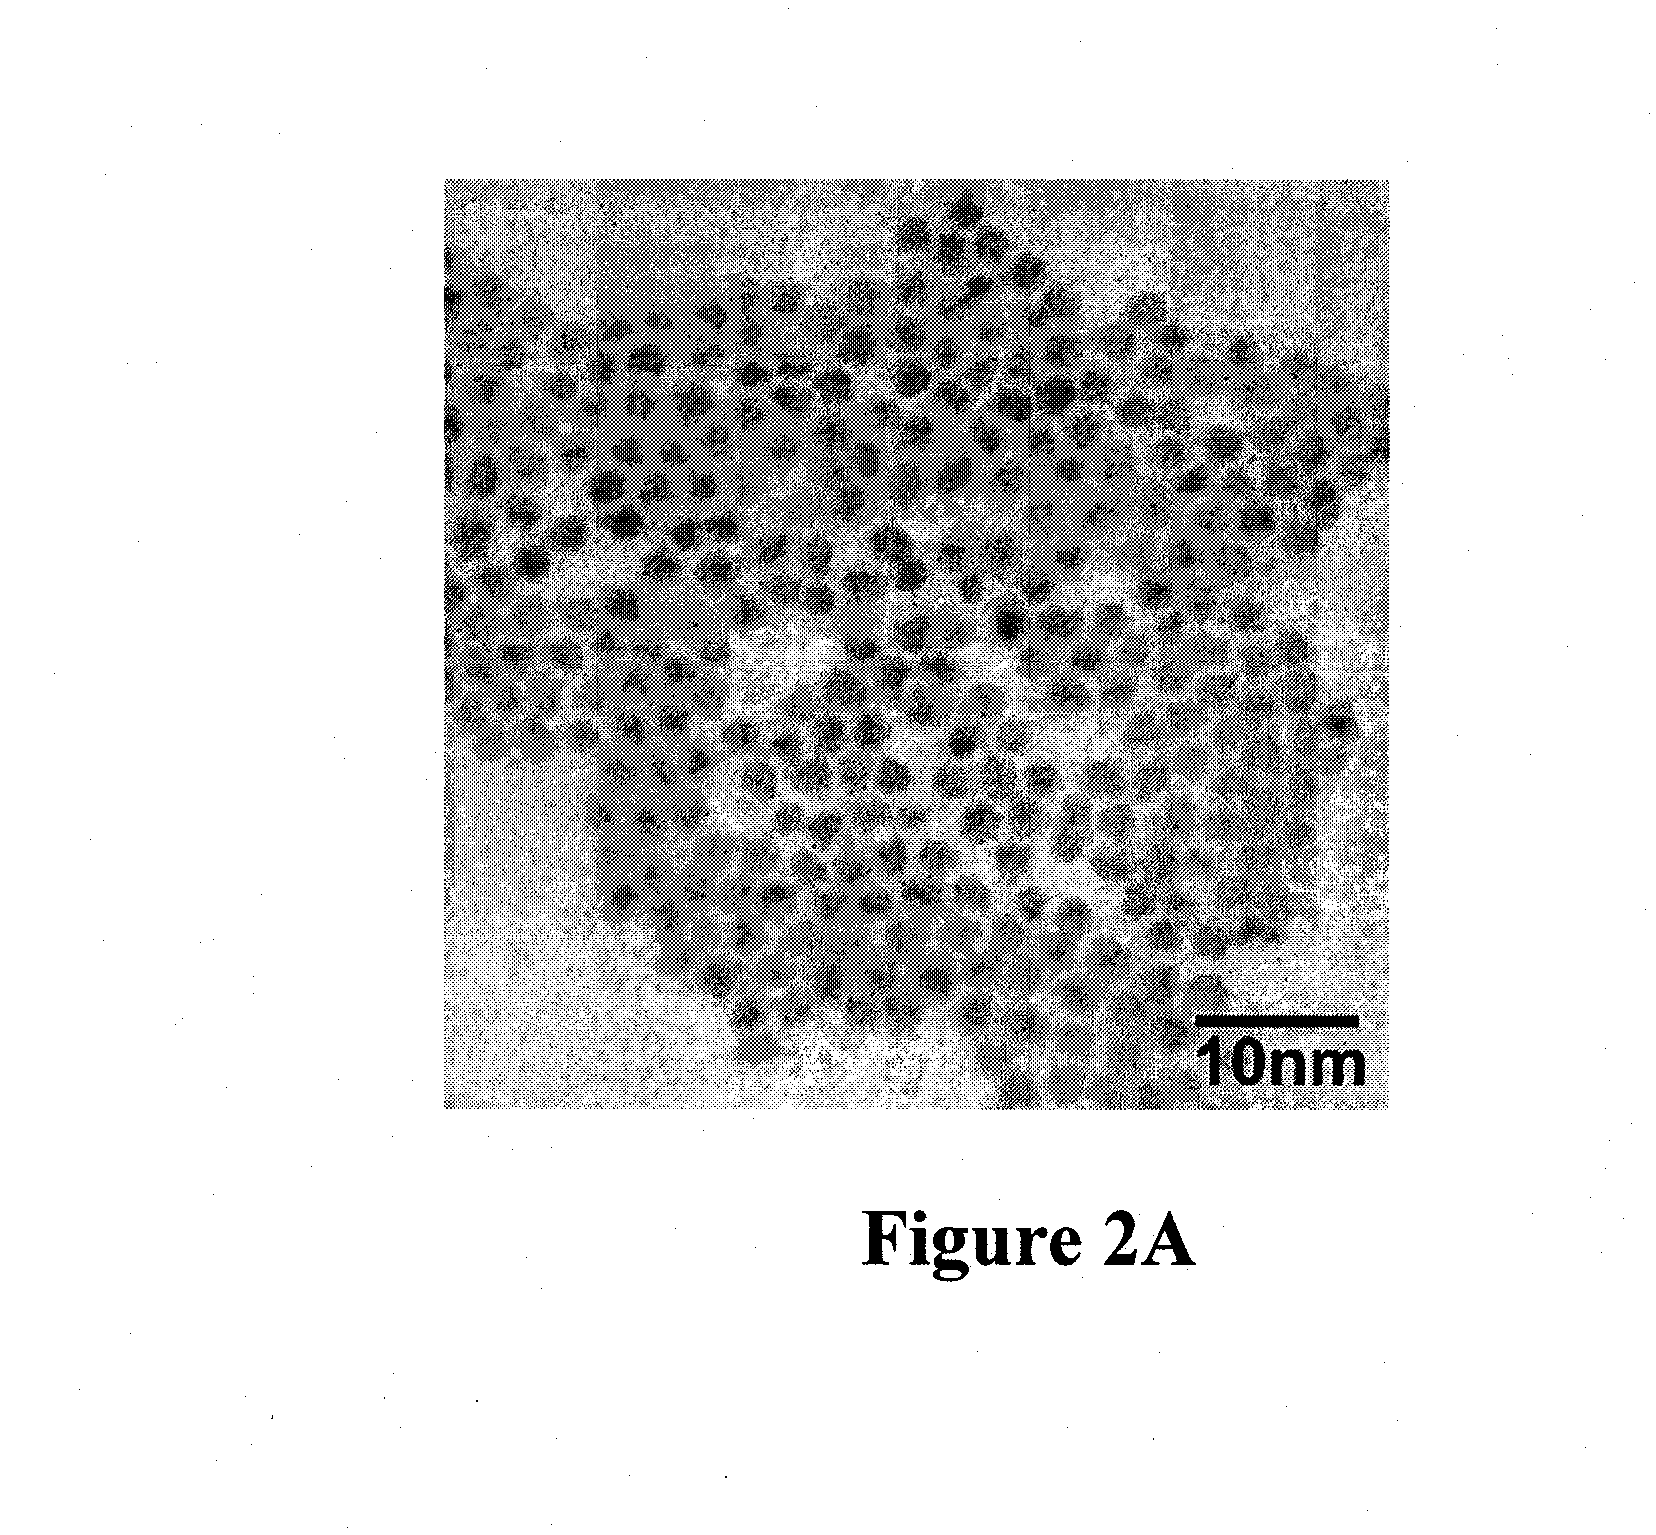 Heavily doped semiconductor nanoparticles